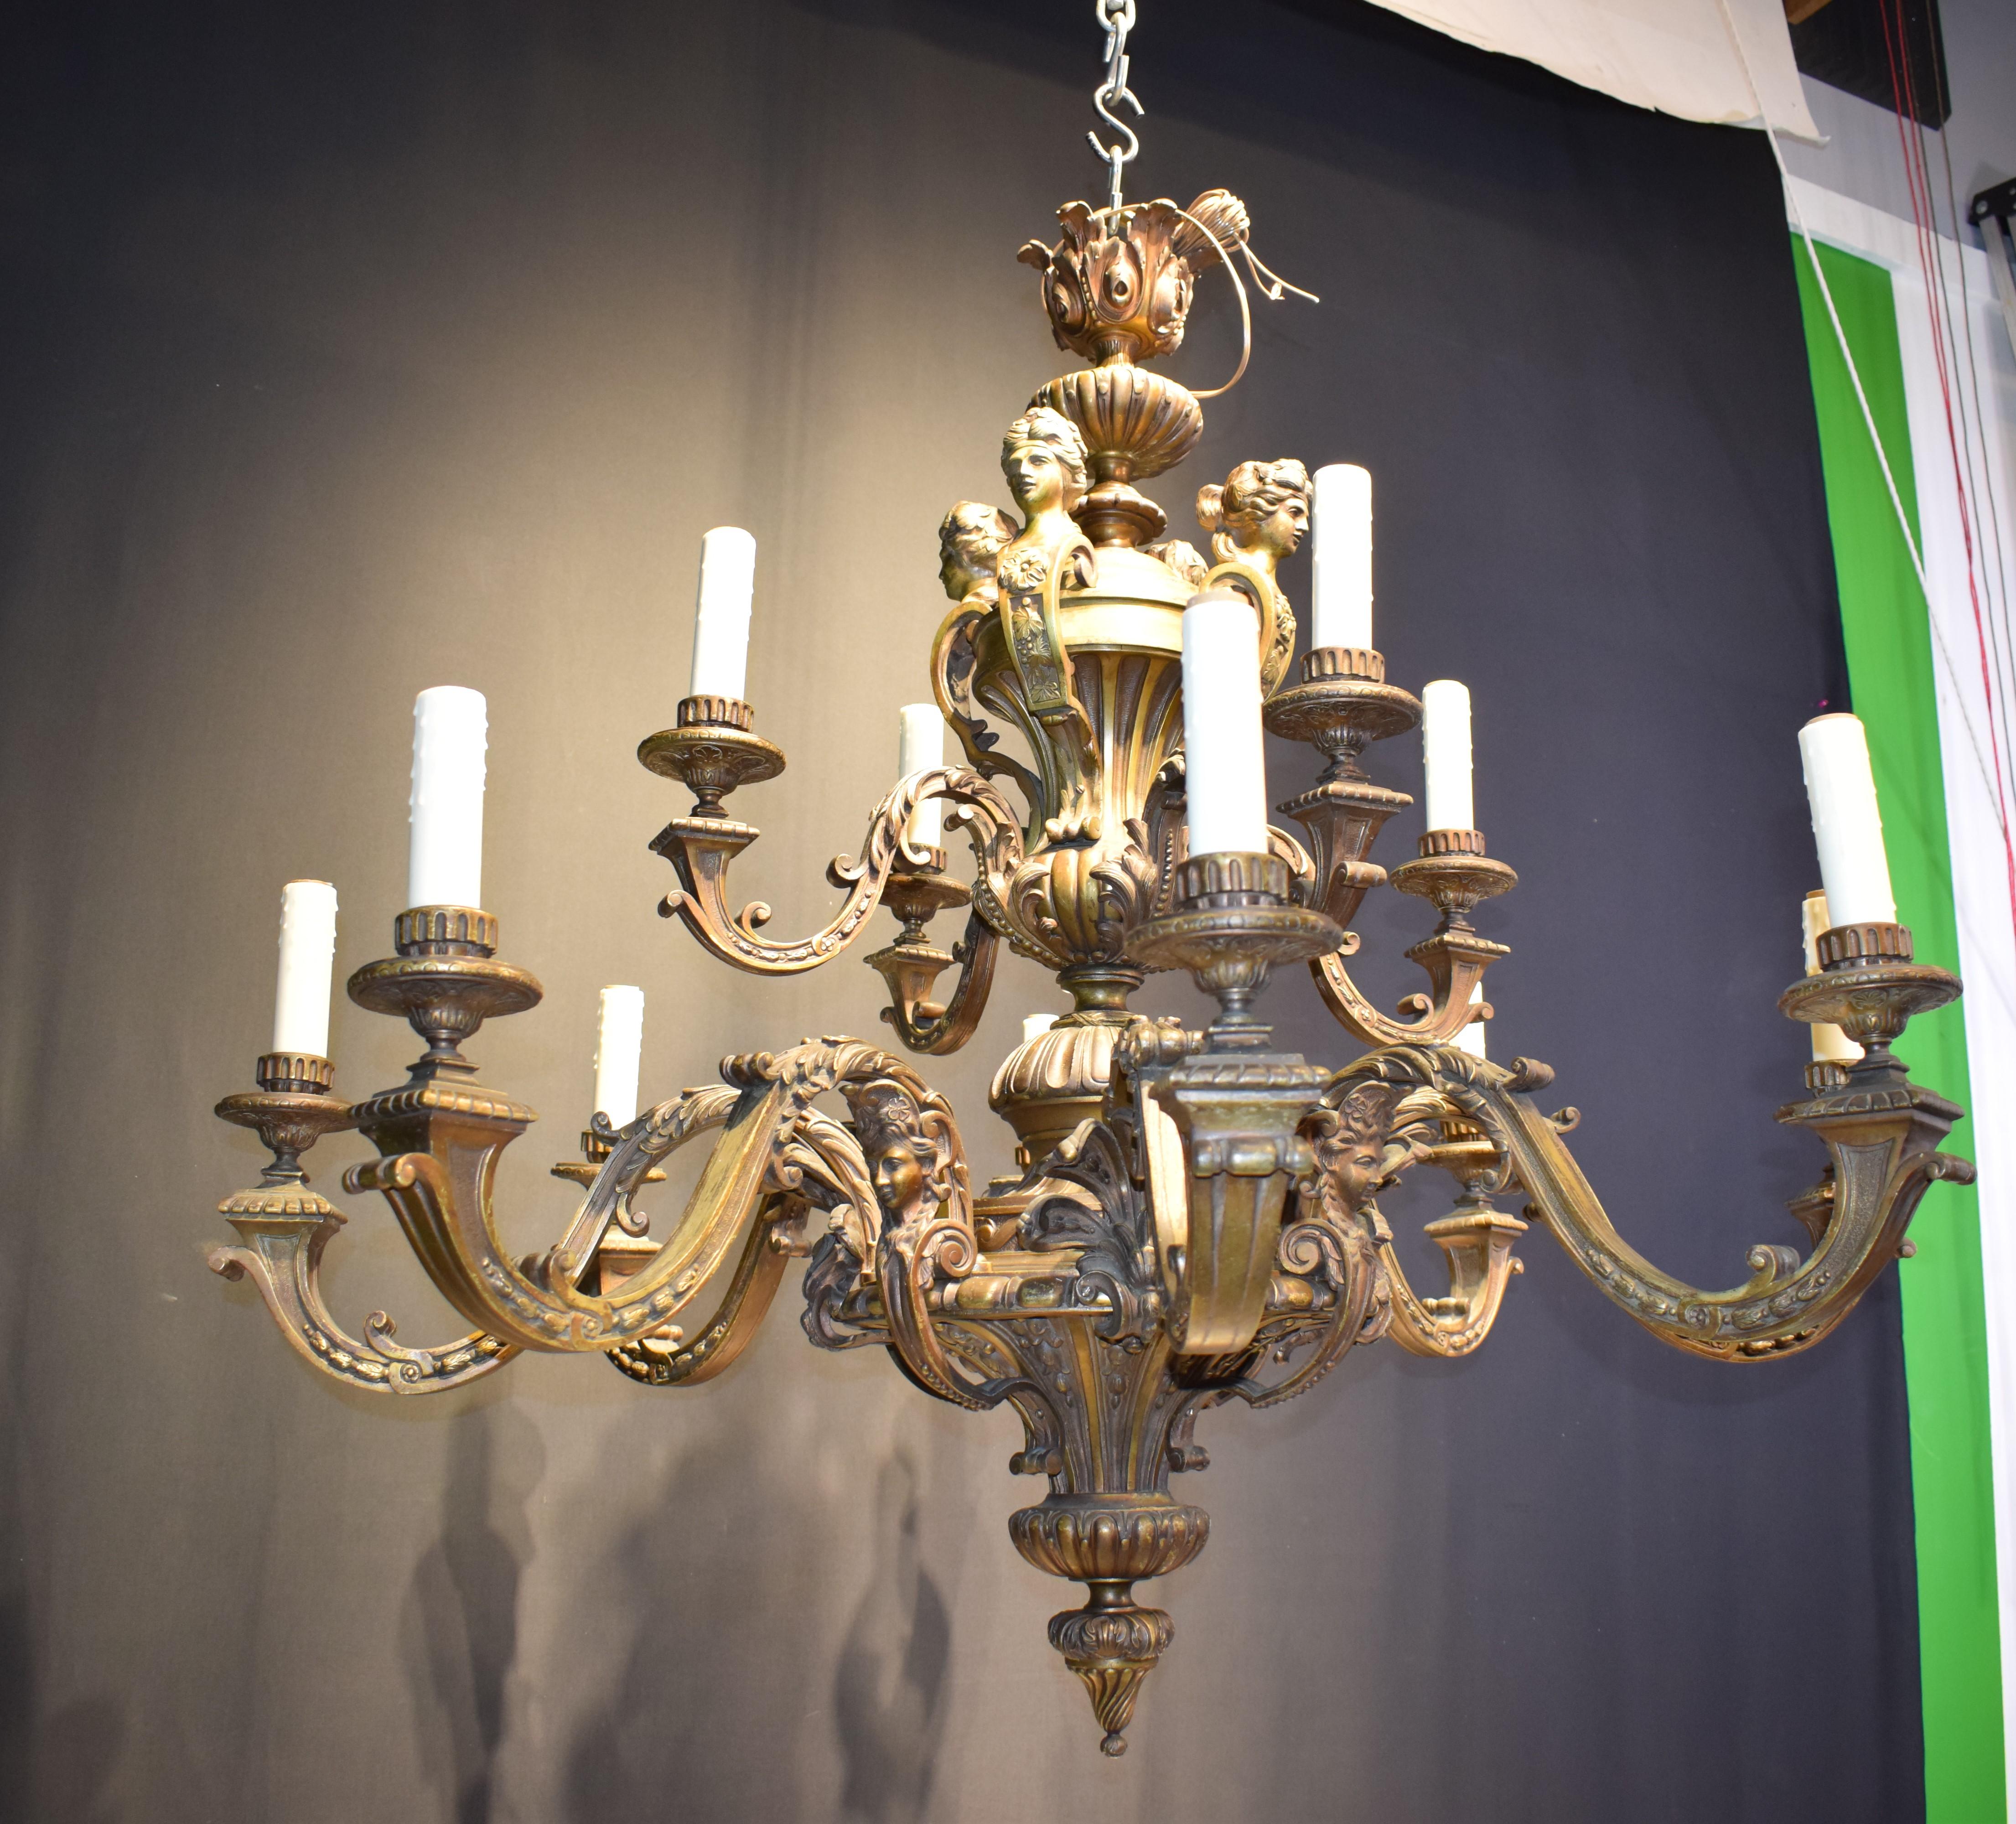 A Magnificent Gilt Bronze Chandelier in the Regency taste featuring five shaped arms in two tiers, Maiden masks of busts. France, circa 1900.
Dimensions: Height 46